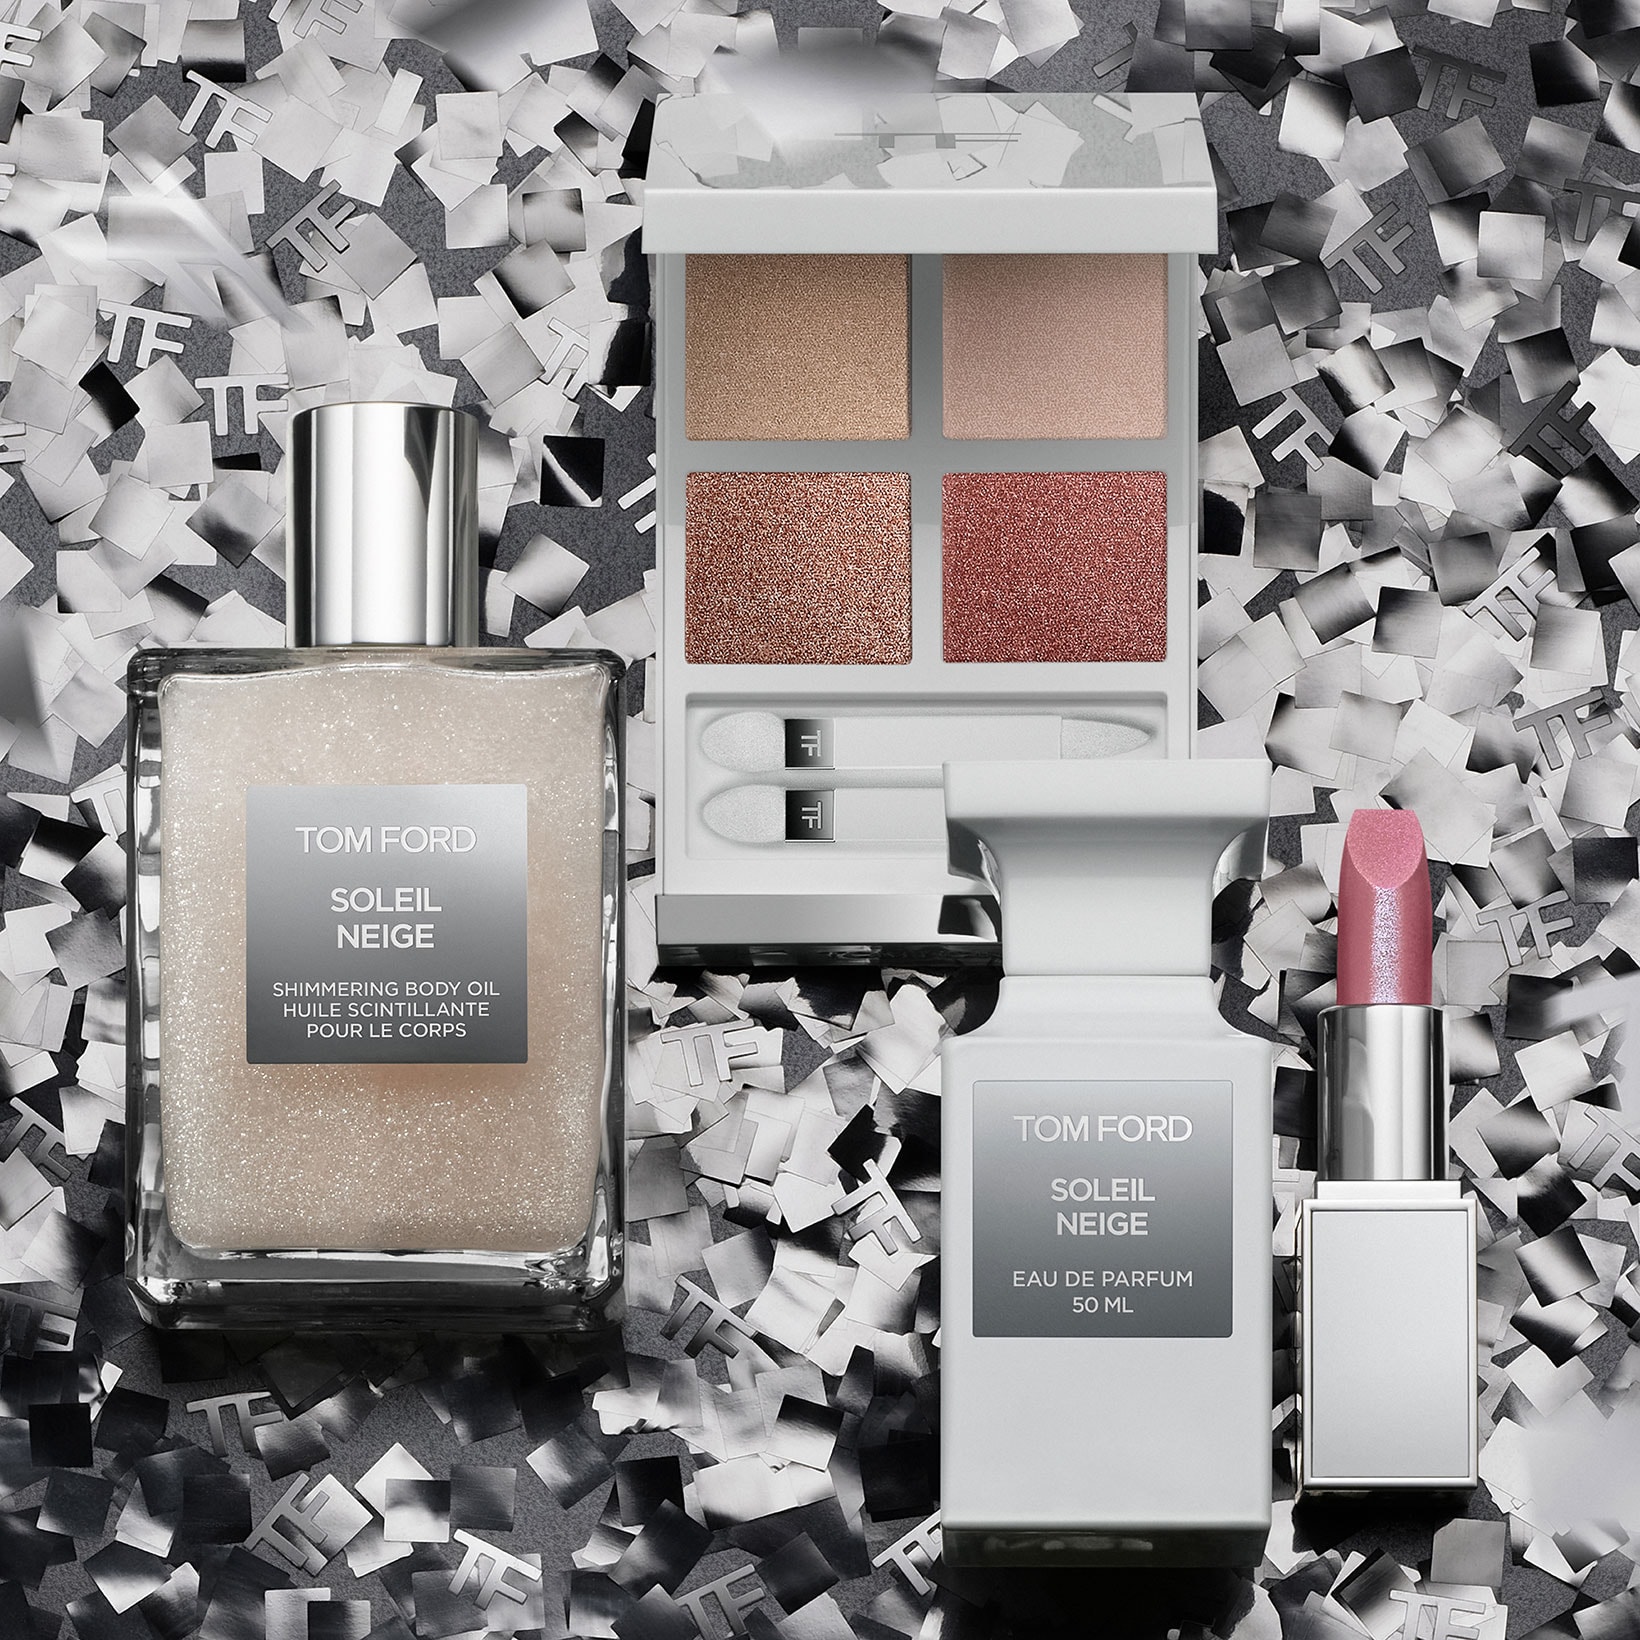 Tom Ford Beauty Soleil Neige Holiday Collection Eyeshadows Lipsticks Perfumes Price